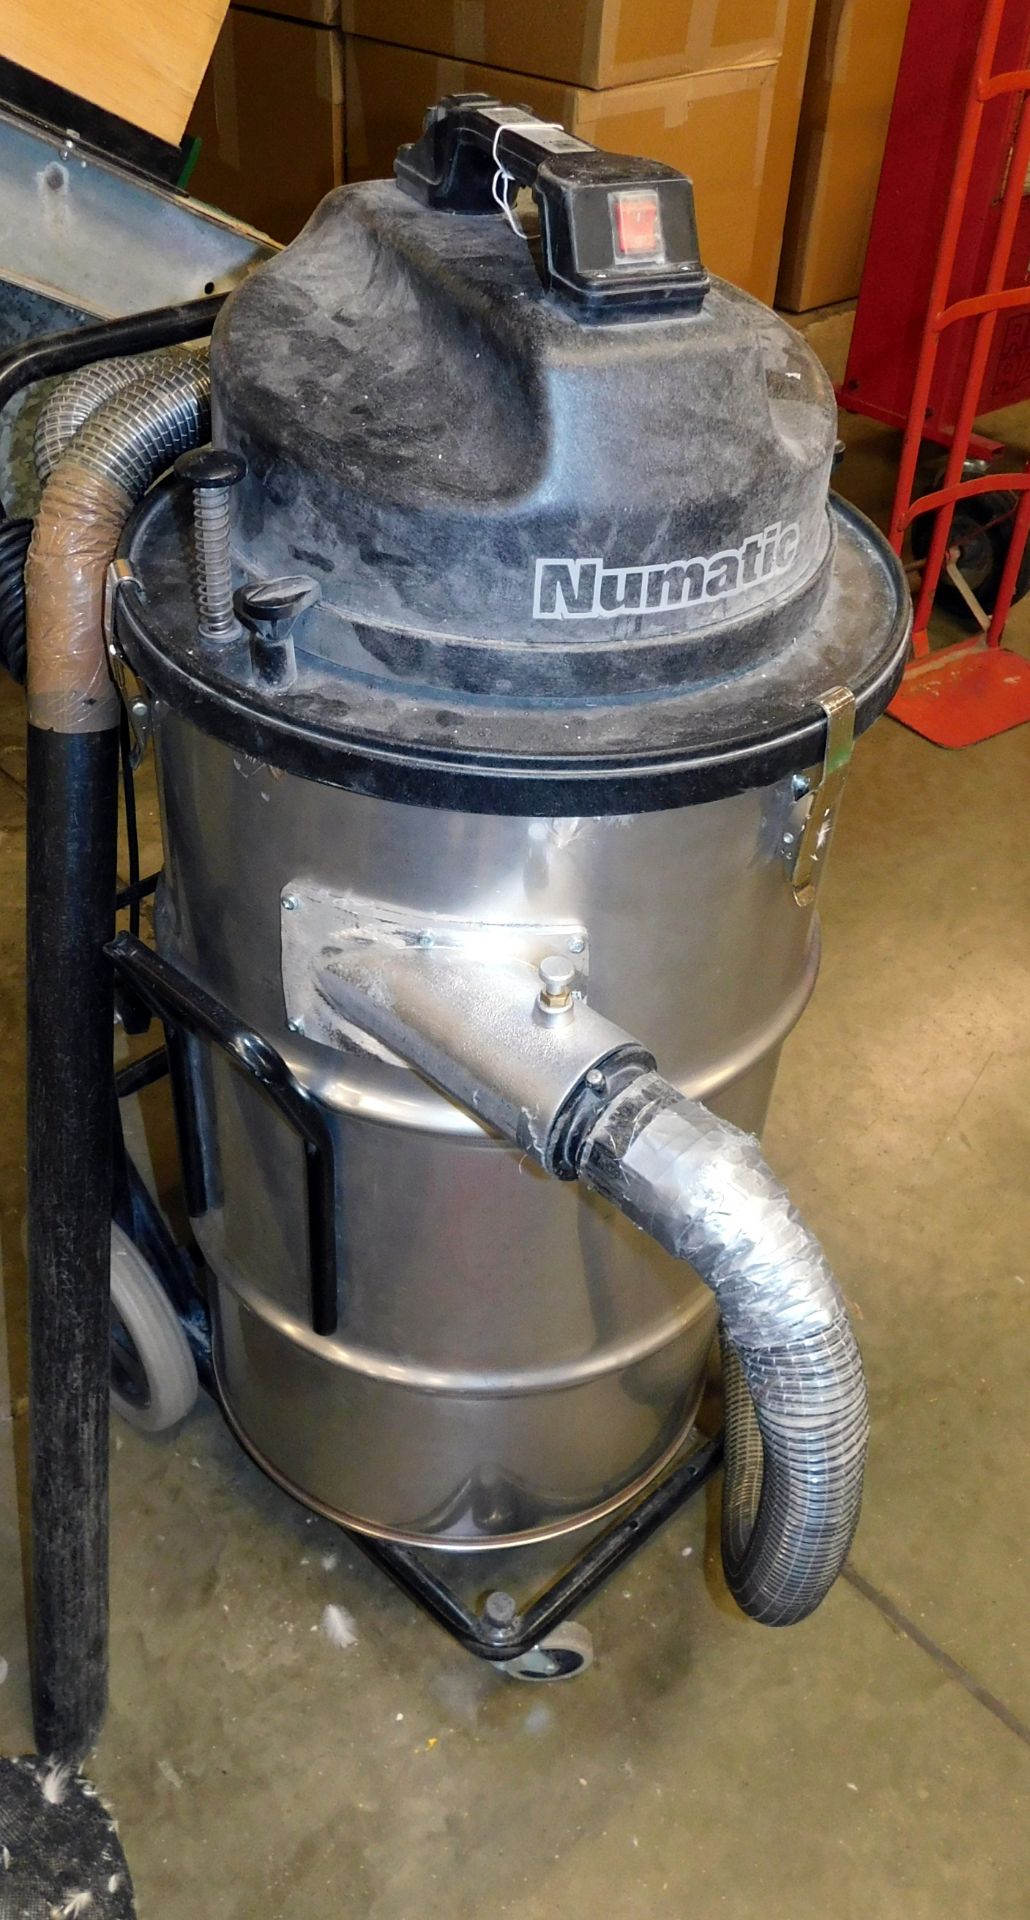 Numatic NTD2003 Industrial Vacuum Cleaner (Location Diss. Please Refer to General Notes) - Image 2 of 2